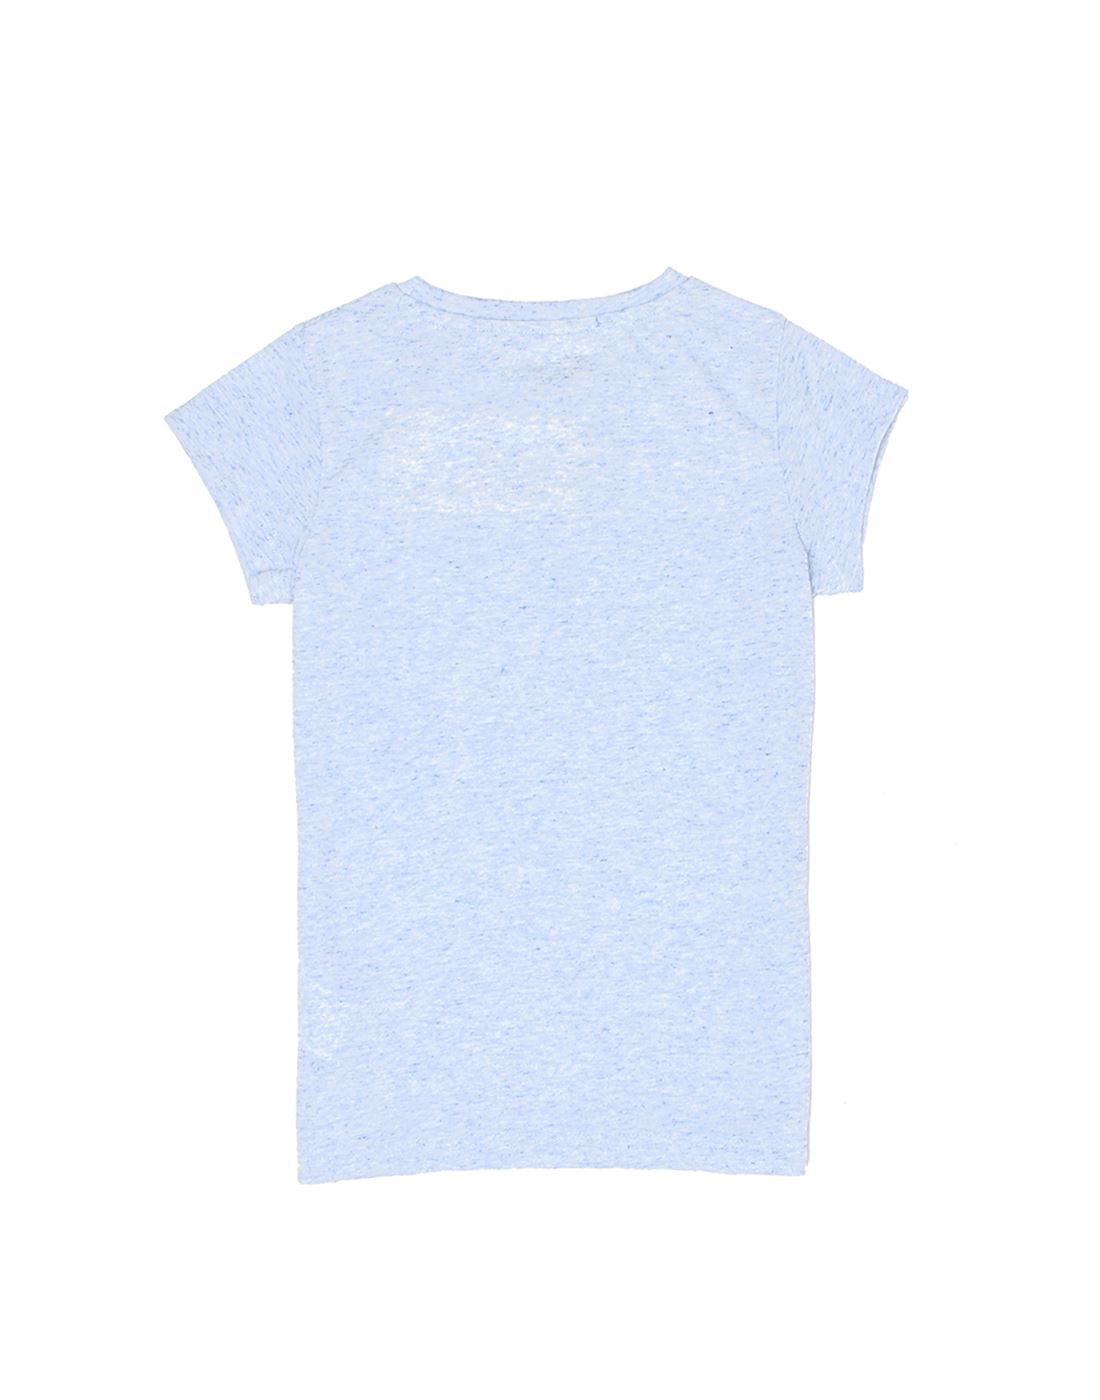 Pepe Jeans Girls Graphic Print Blue T-Shirt